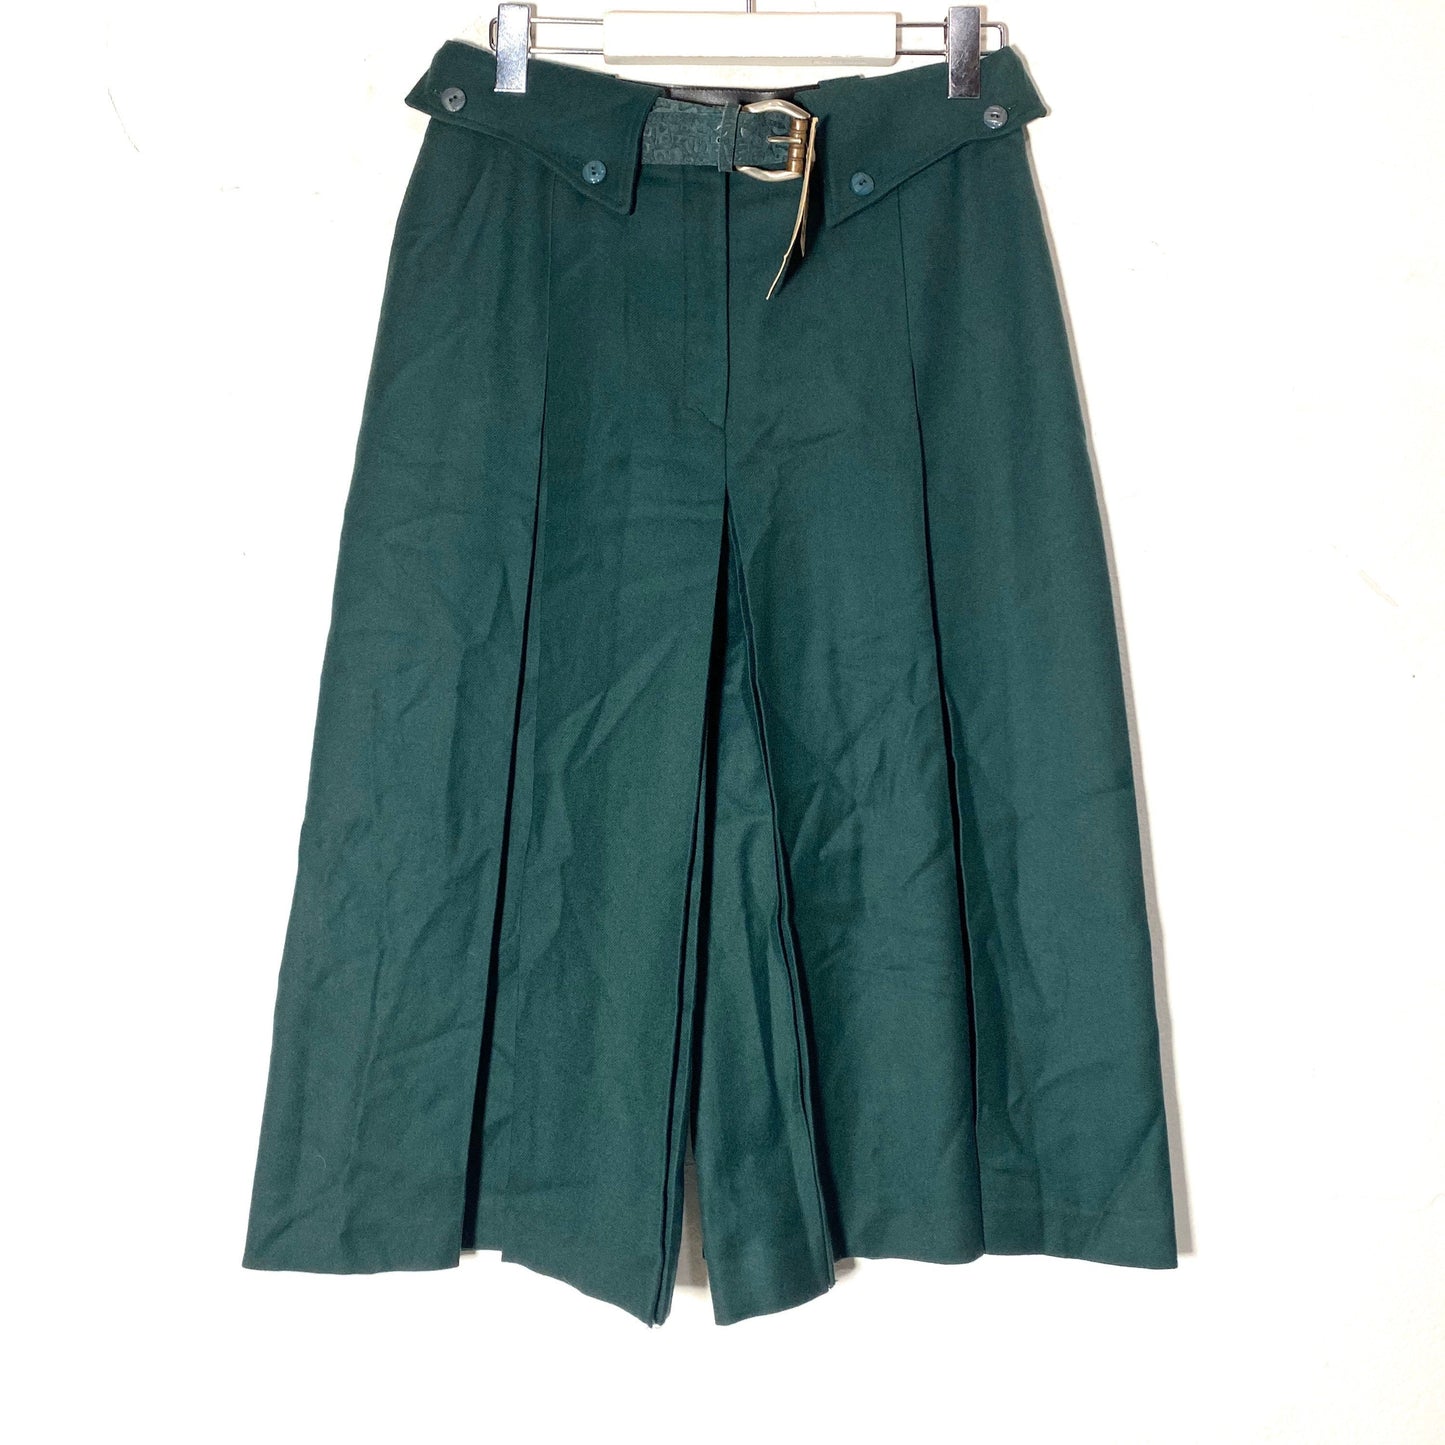 Vintage 70s petrol green pant-skirt made in Itaky, new with tags, belt included.